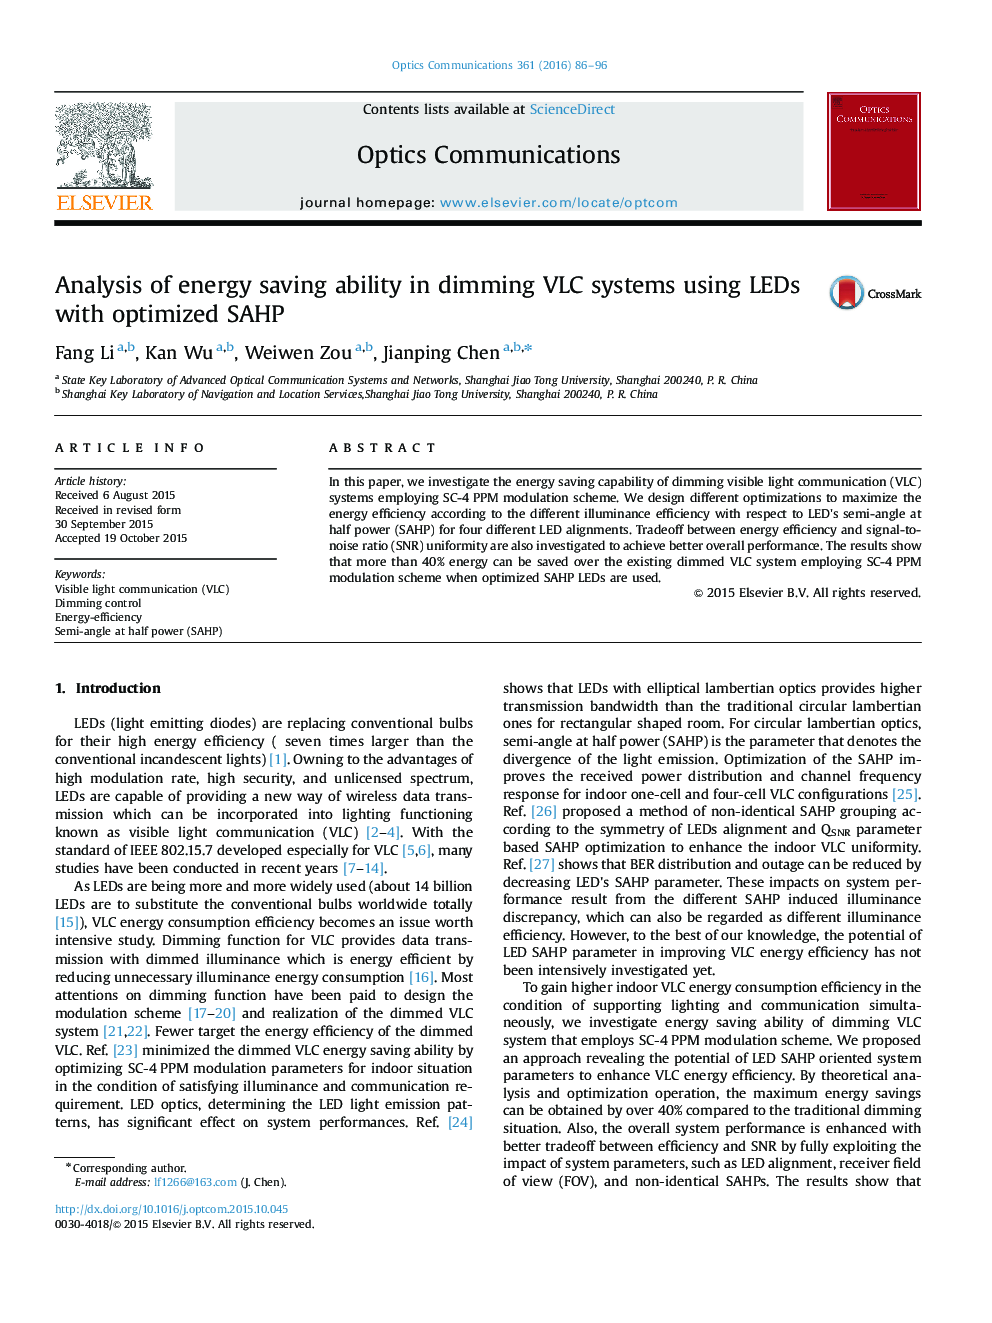 Analysis of energy saving ability in dimming VLC systems using LEDs with optimized SAHP